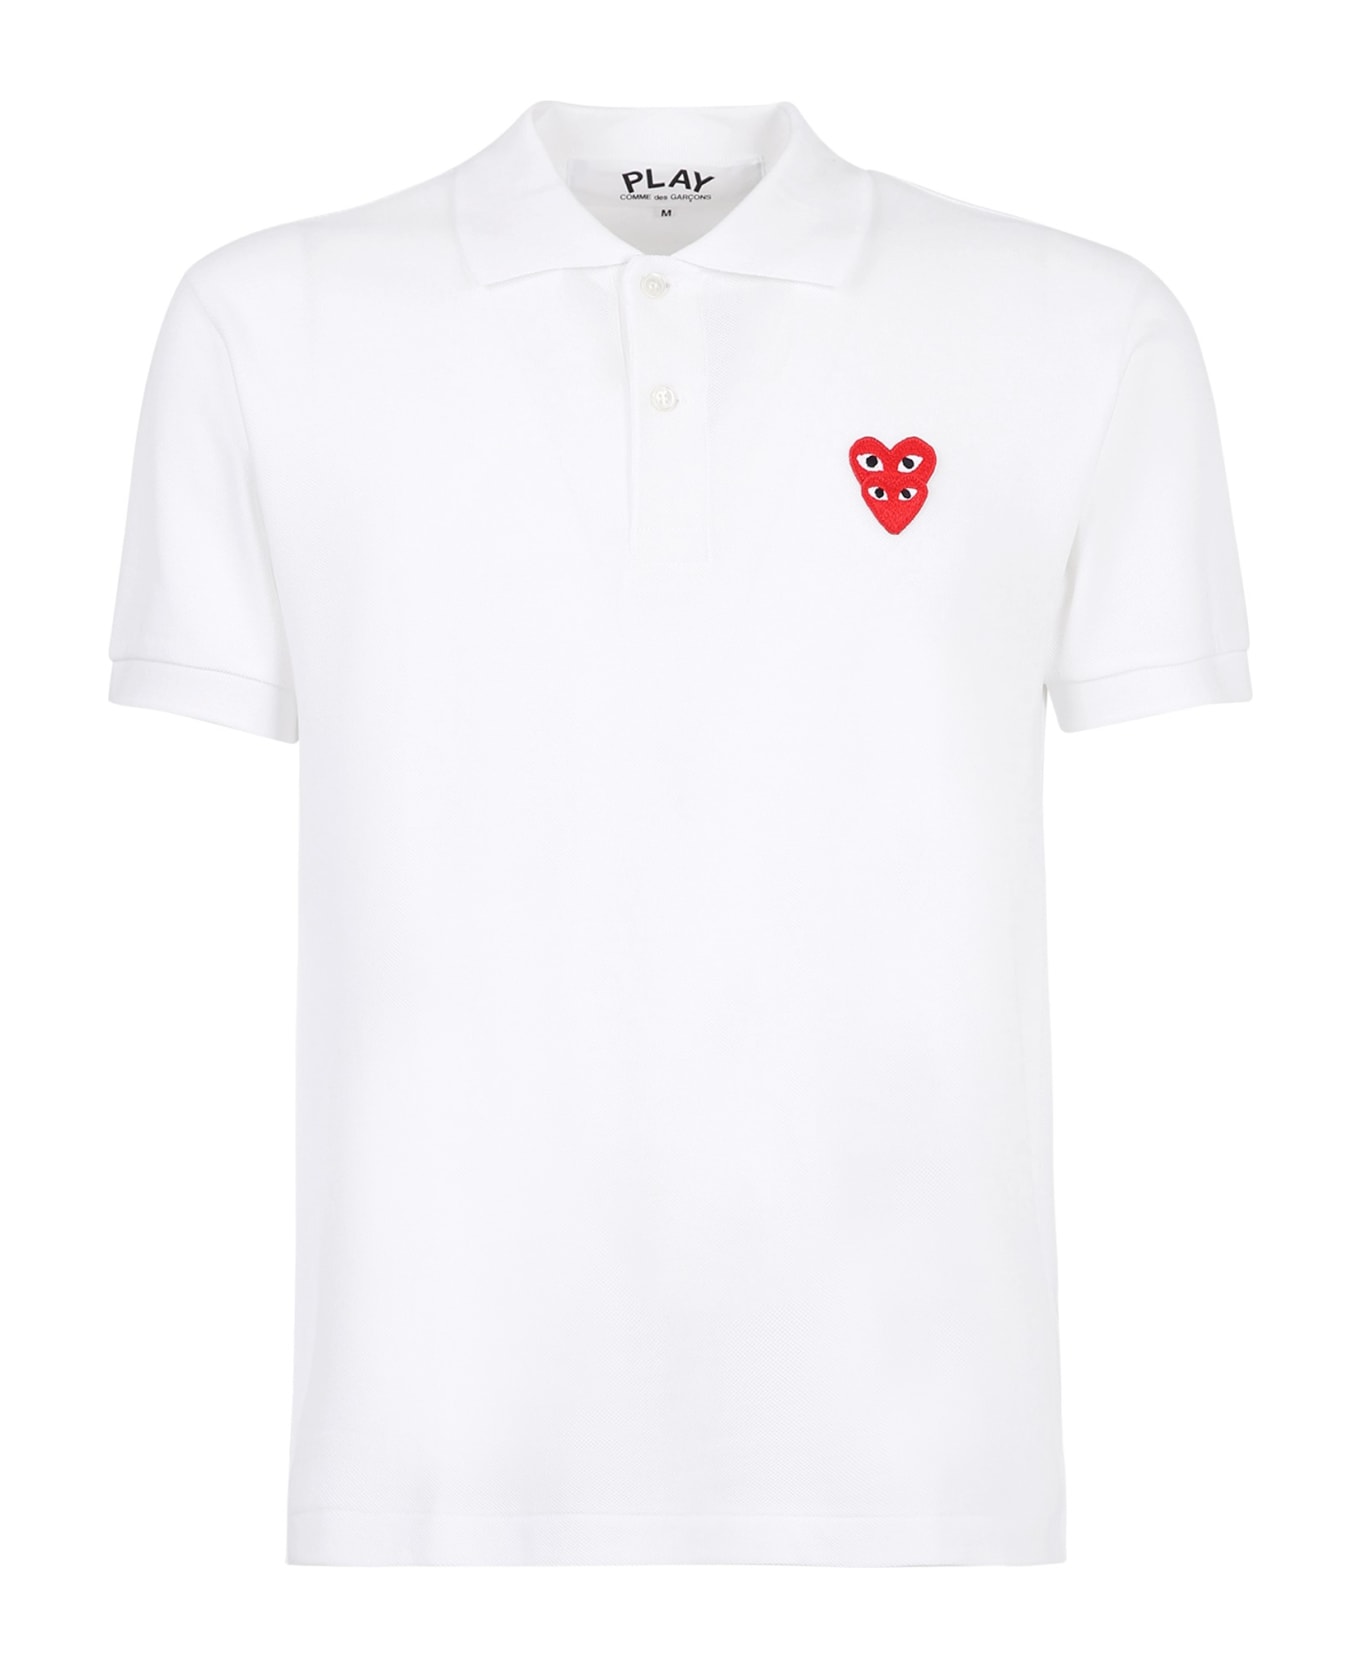 Comme des Garçons Play Embroidered Polo - White